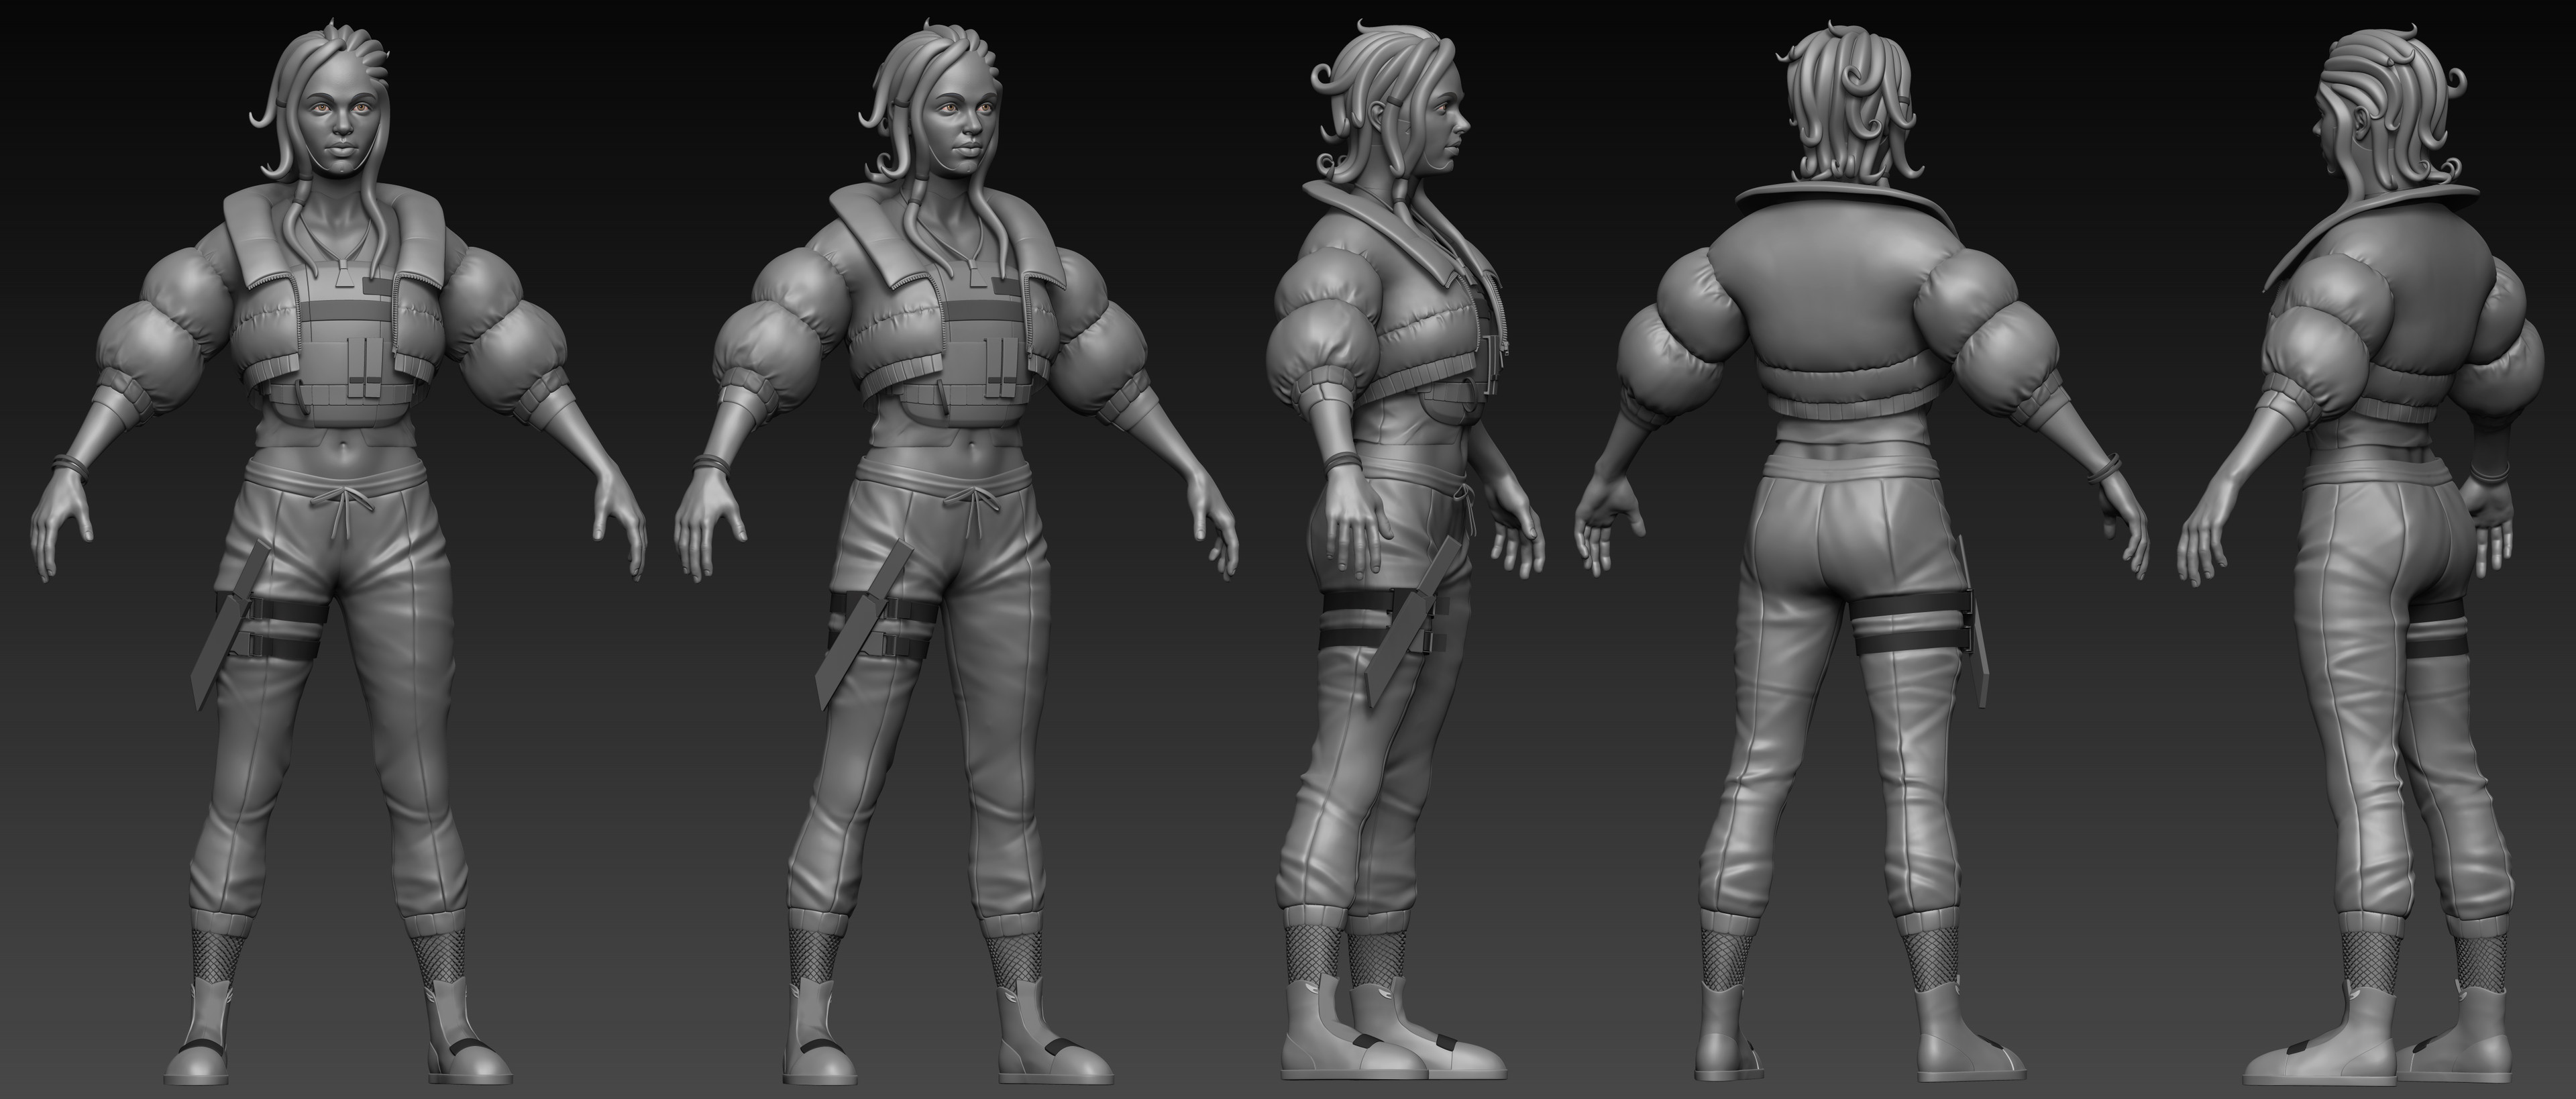 Zbrush High Poly